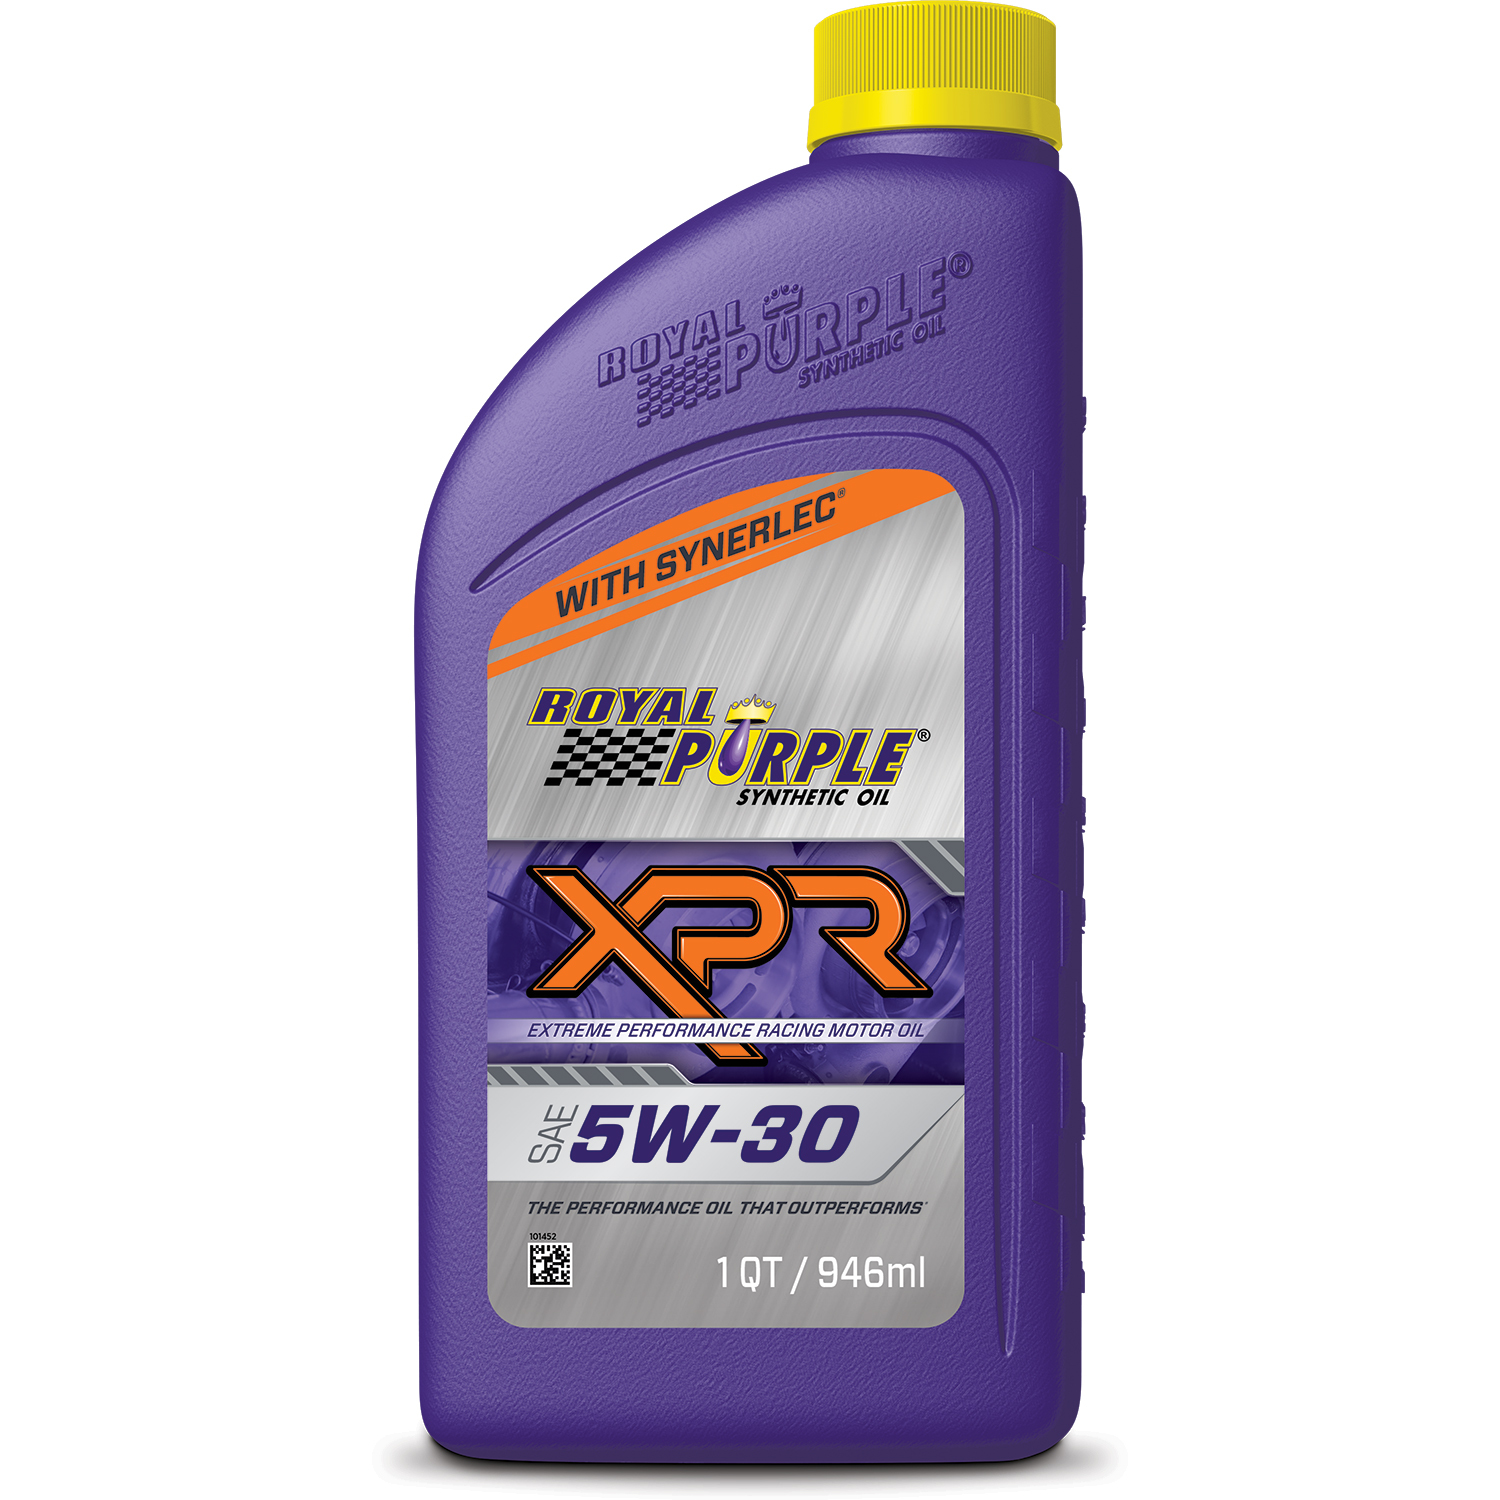 ROYAL PURPLE Motor Oil Extreme Performance Racing 5W30 Synthetic 1 qt Bottle Eac